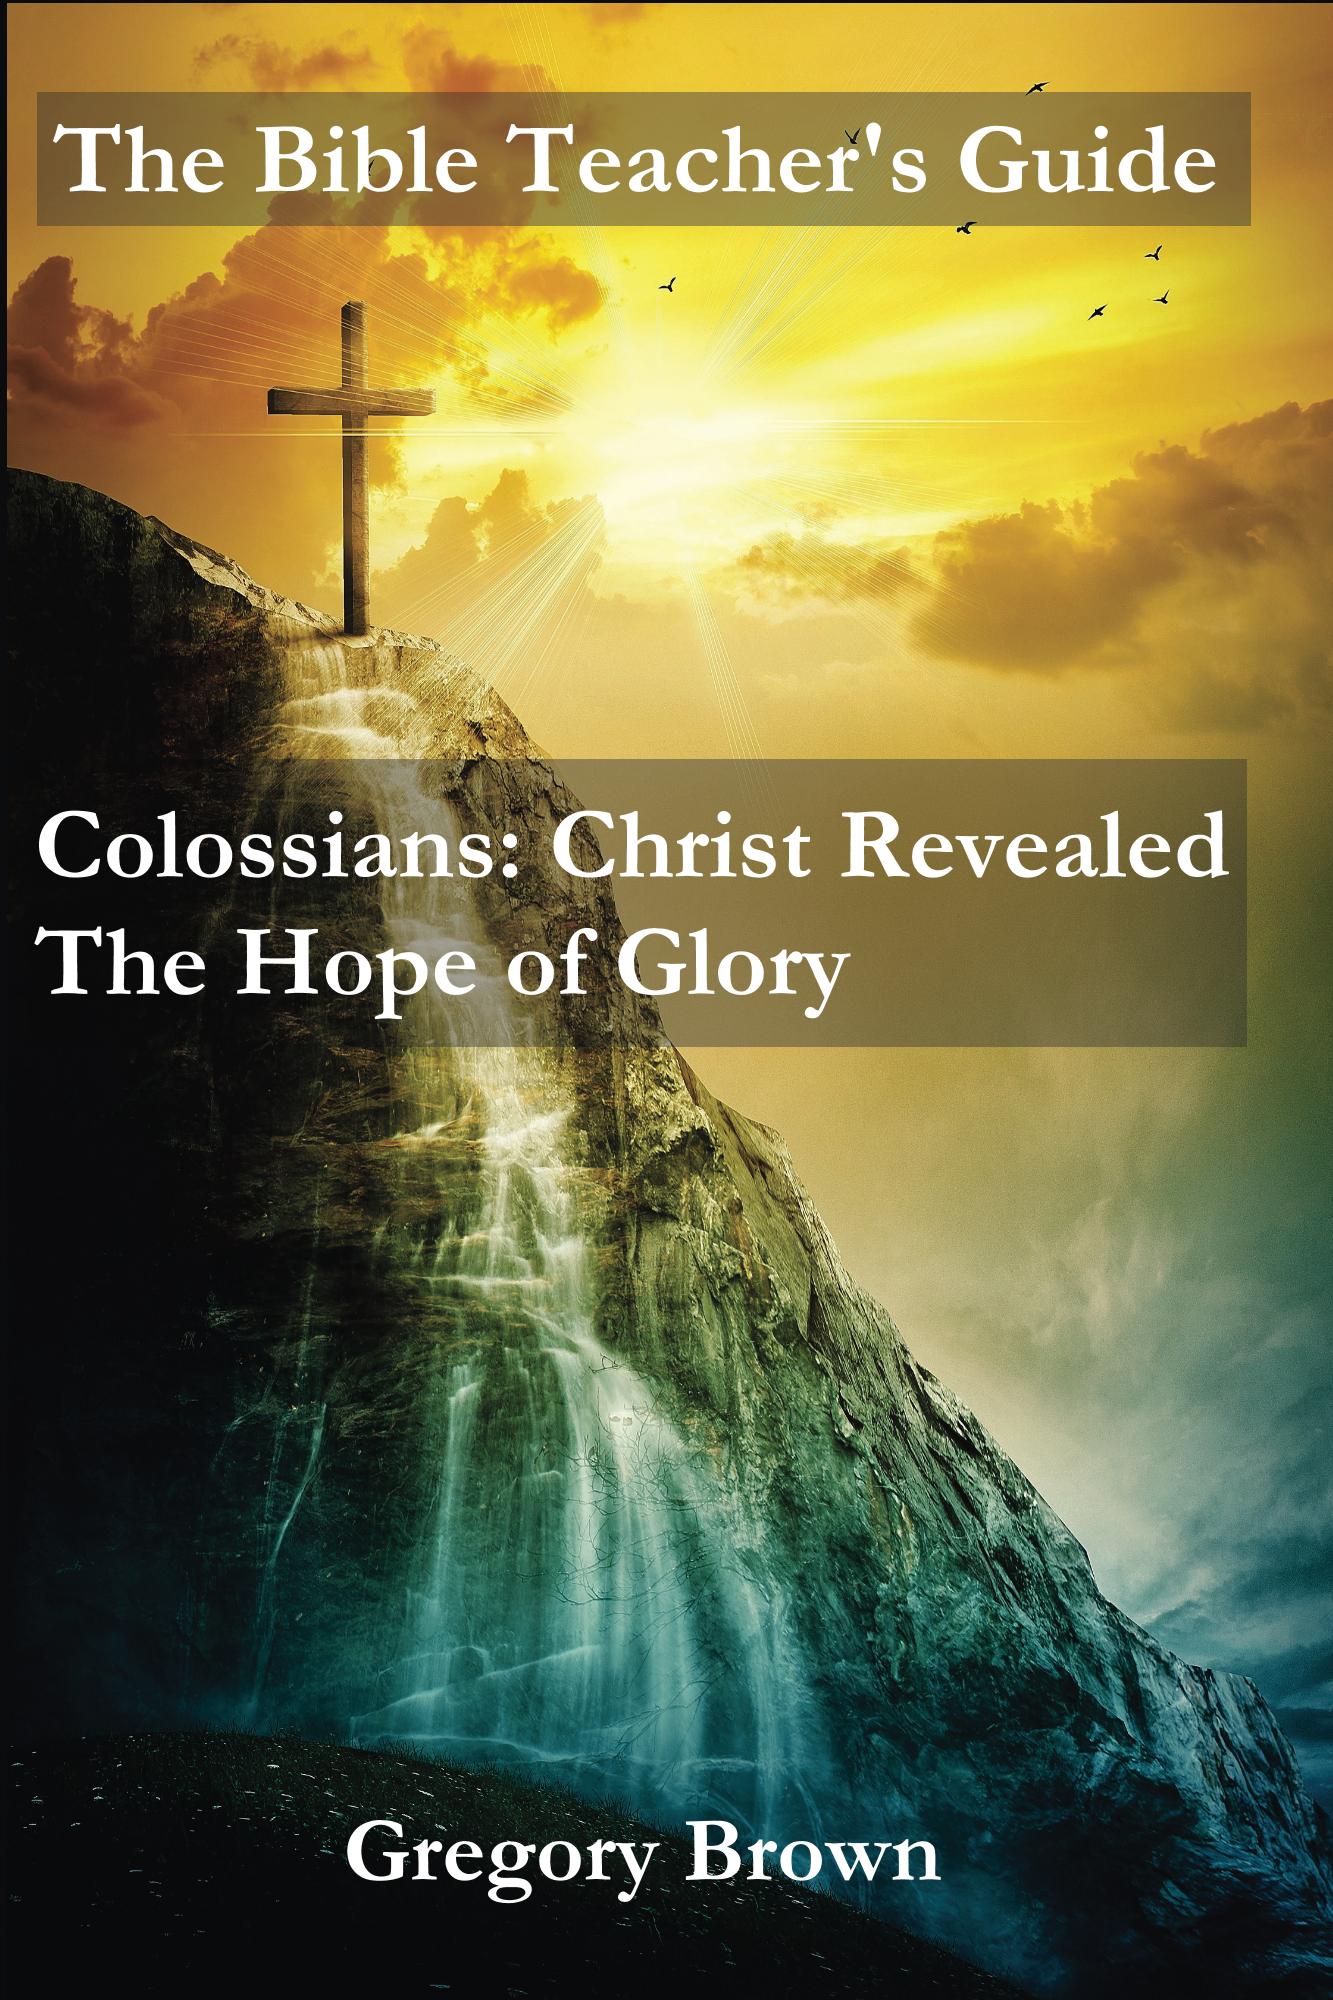 FREE: The Bible Teacher’s Guide: Colossians: Christ Revealed by Gregory Brown